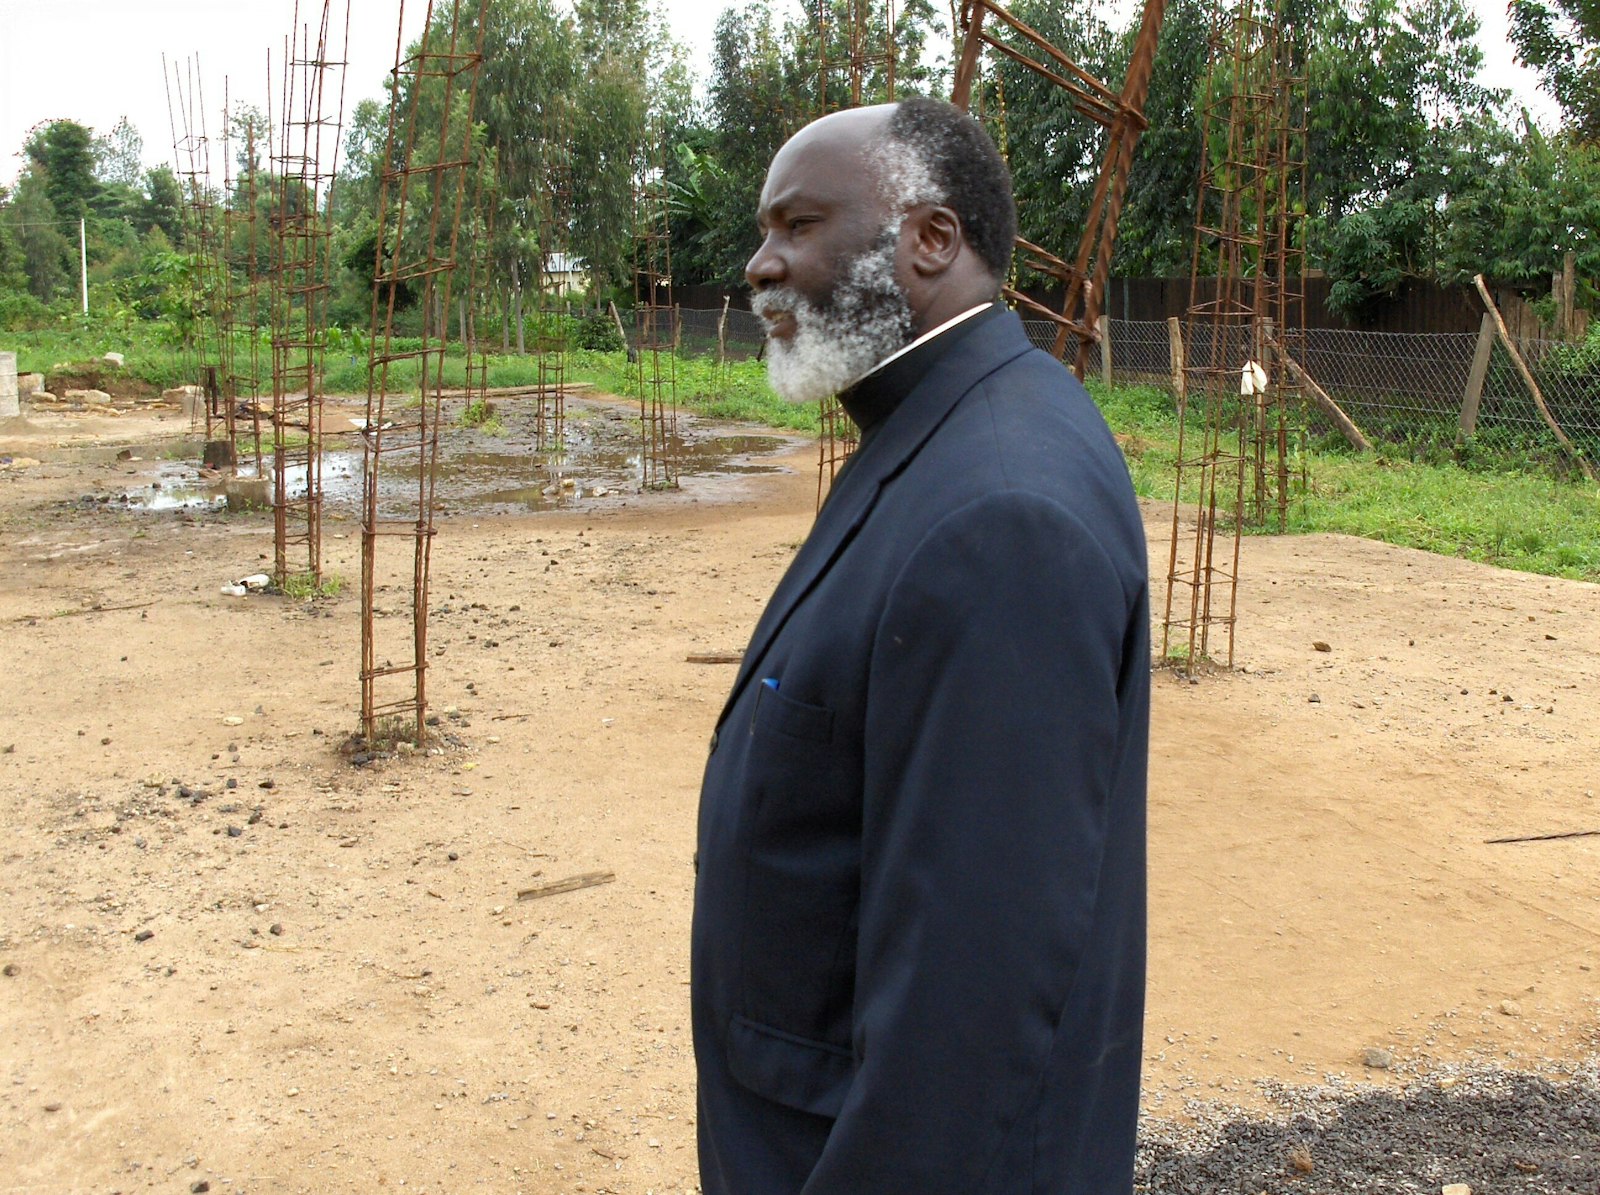 Fr. Francis Riwa is a Tanzanian priest who came to Kenya in 1973. After ordination and serving in parish life, Fr. Riwa found a calling in caring for the destitute children in Meru, Kenya, particularly for children with HIV, who are often discarded in rural Kenyan communities.